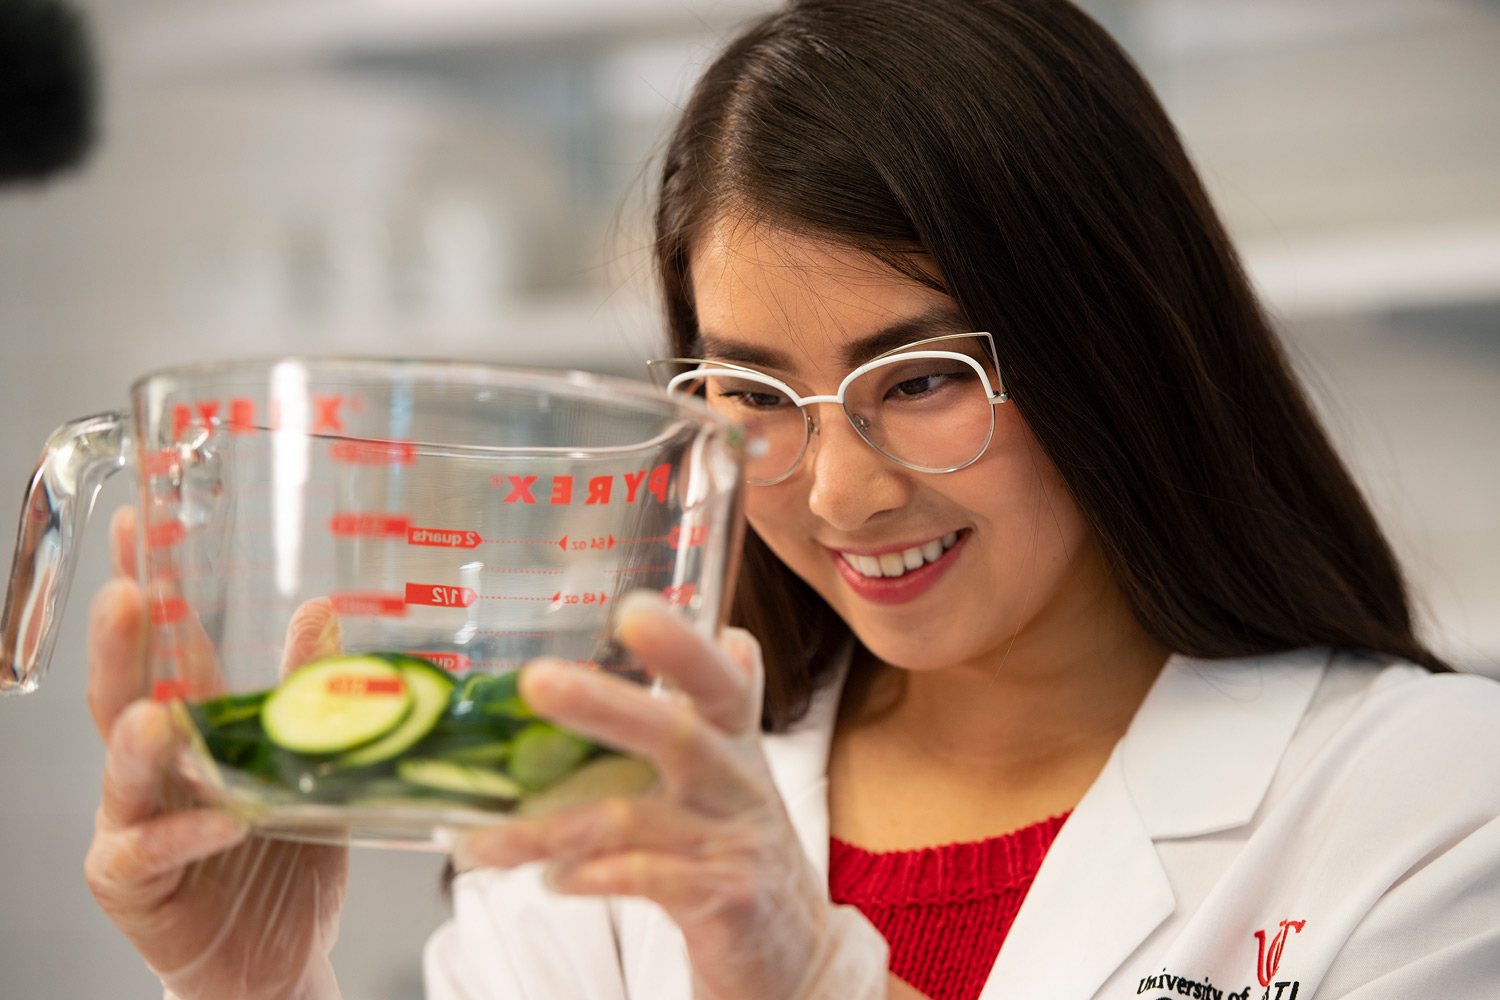 A Nutrition Sciences student anazlyzes a cup of food